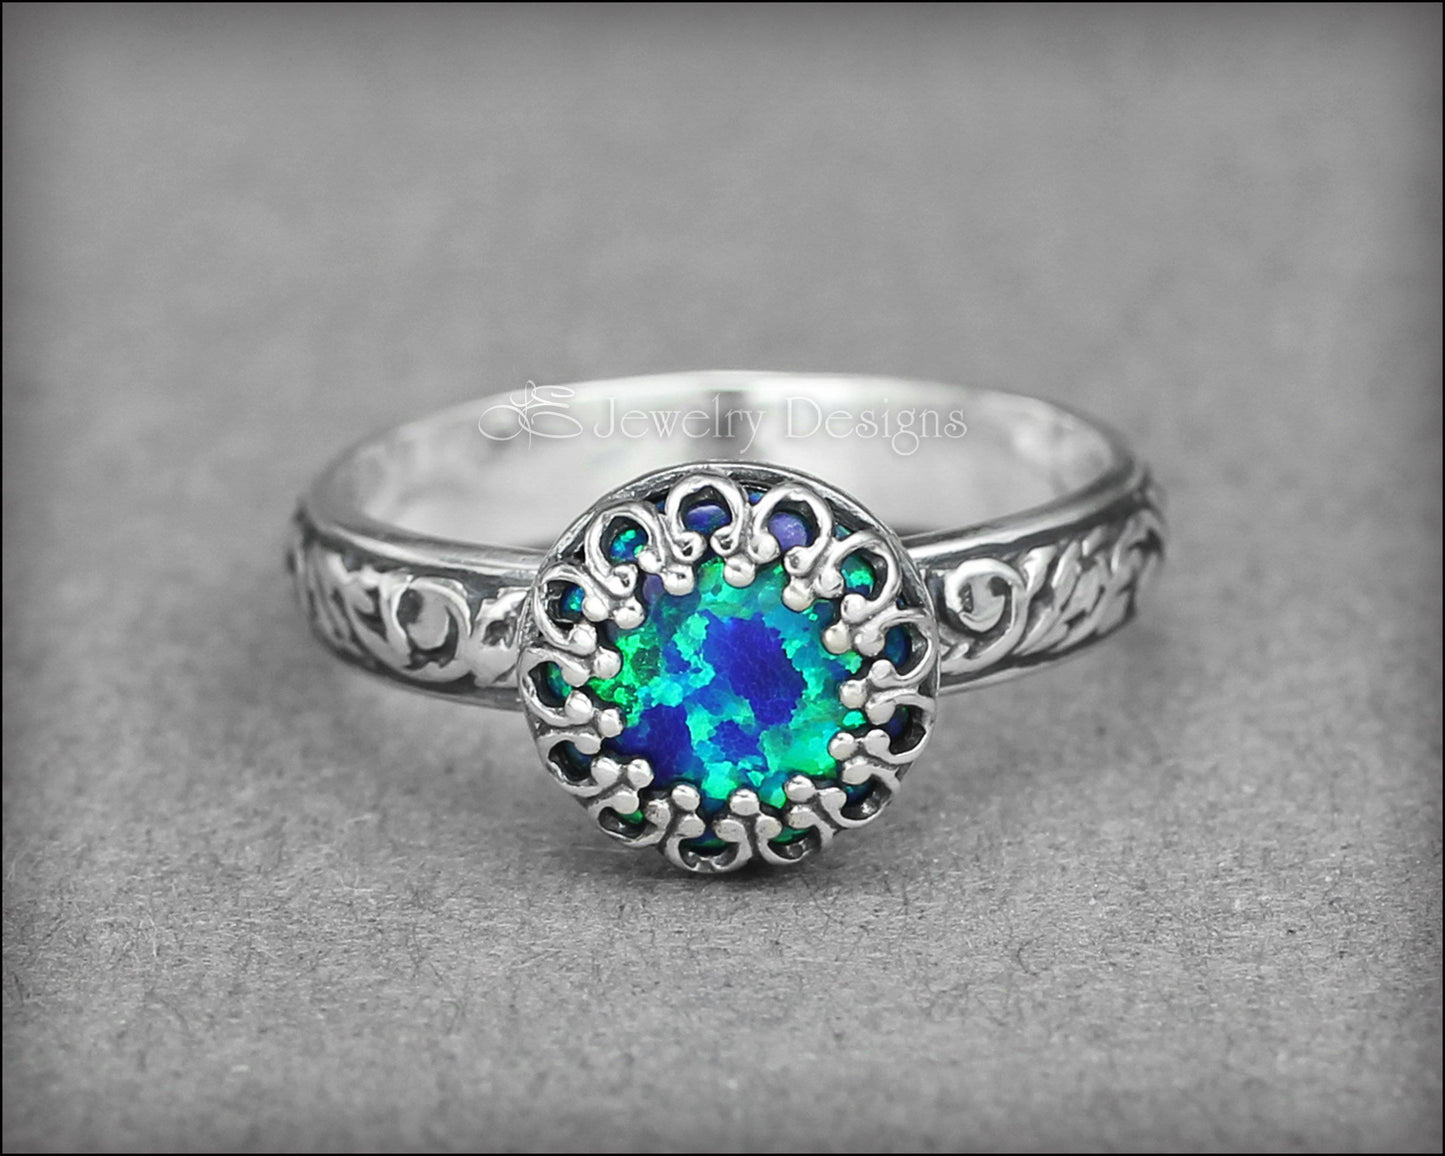 Load image into Gallery viewer, Size 6.75 - Sterling Opal Ring - LE Jewelry Designs
